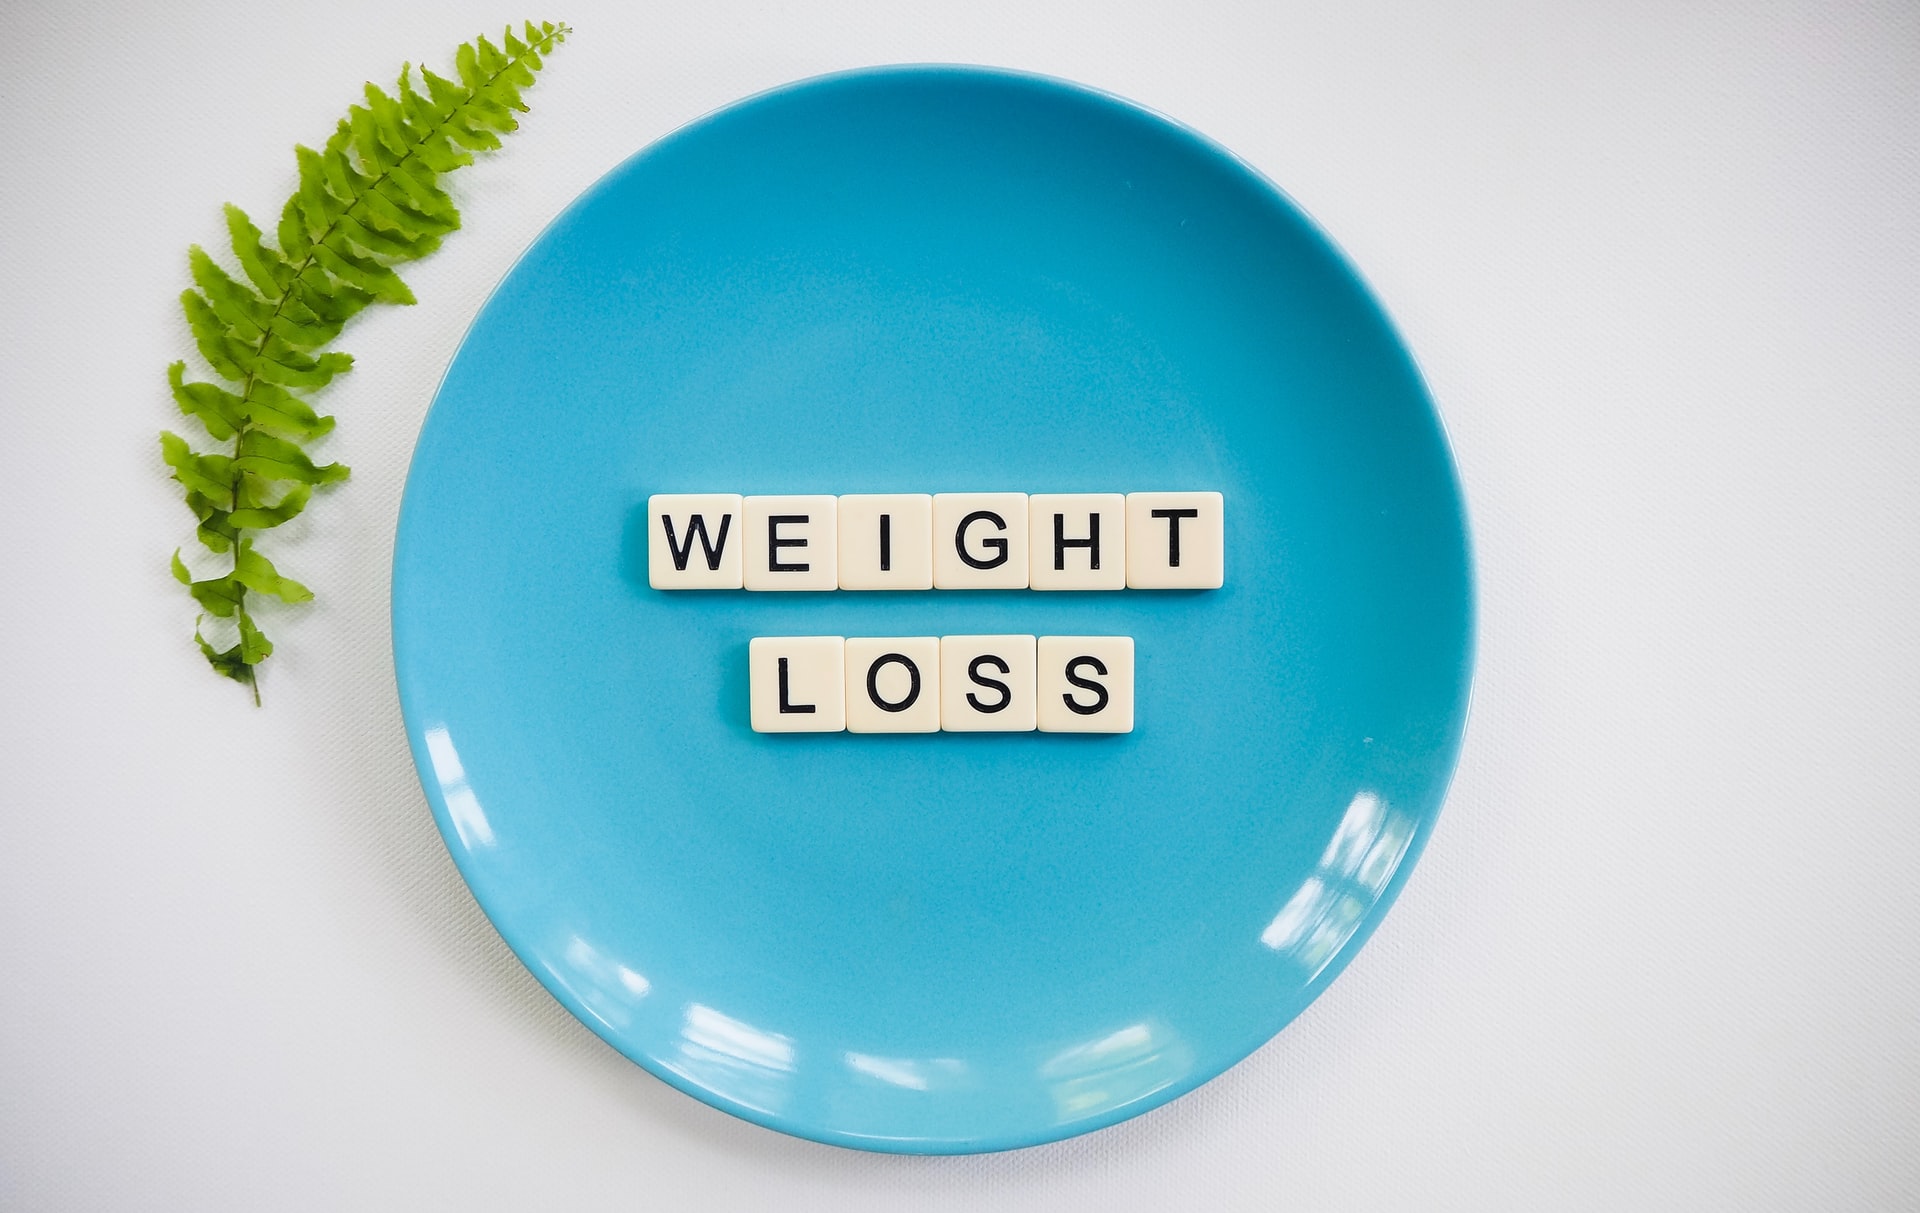 What foods to eat to lose weight